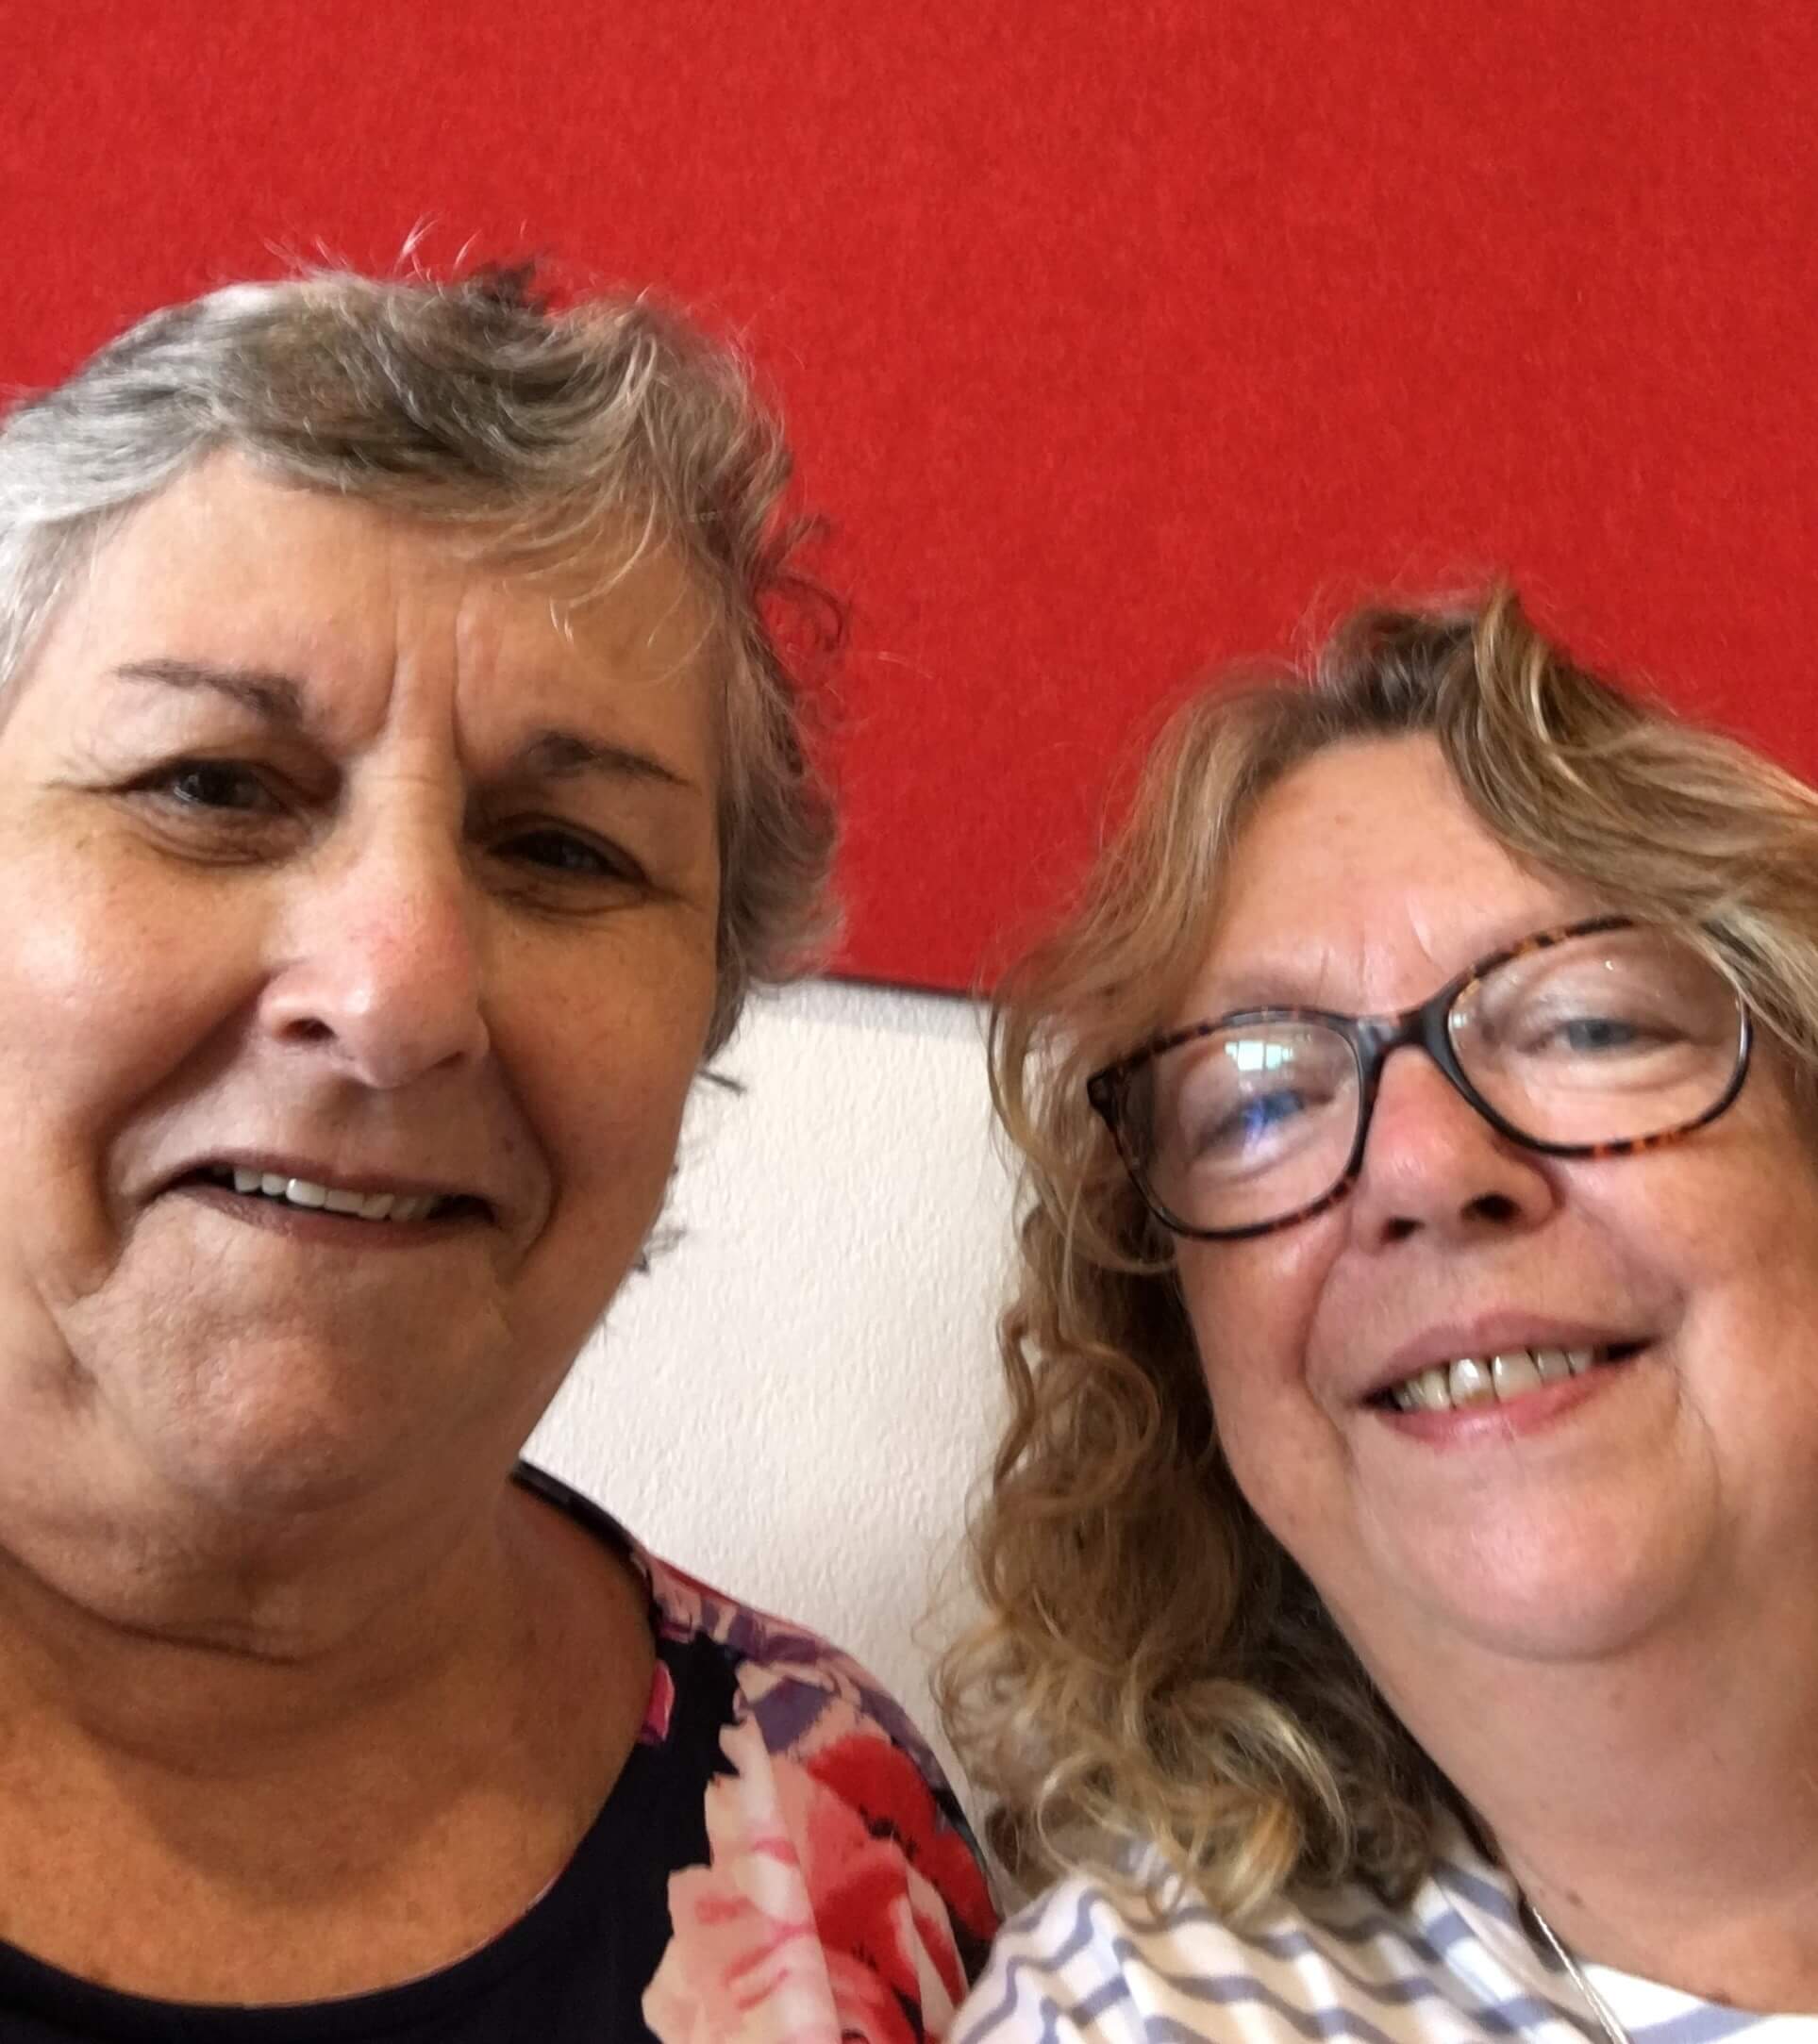 Selfie of two older ladies in front of a red wall